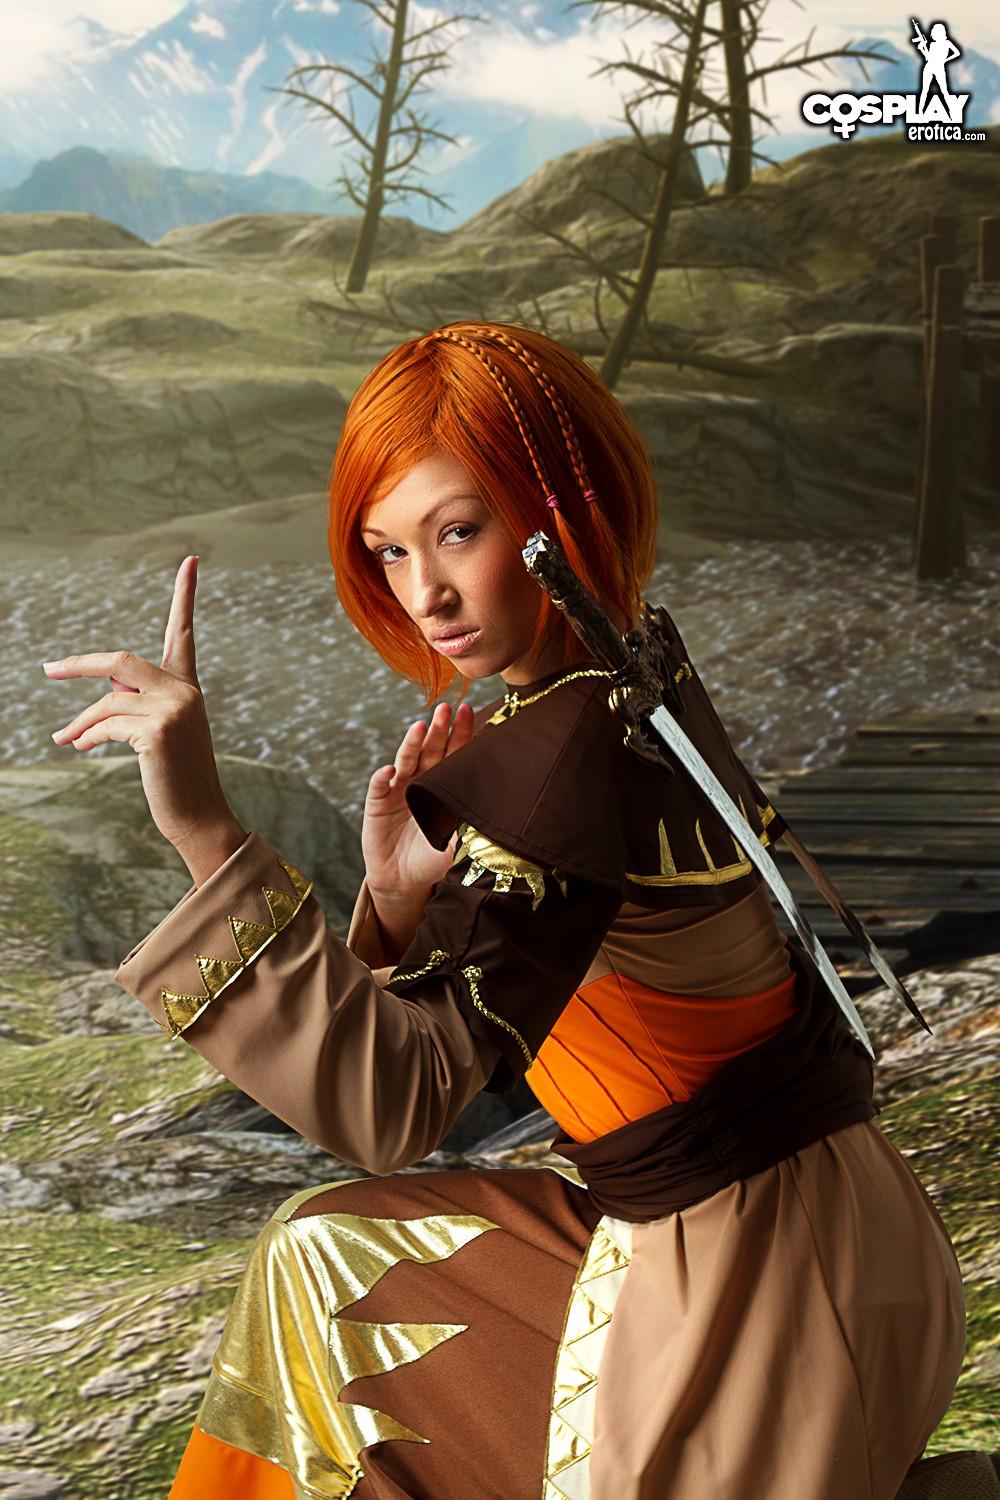 Redhead cosplayer Brownie dresses up as a fantasy character #53563941